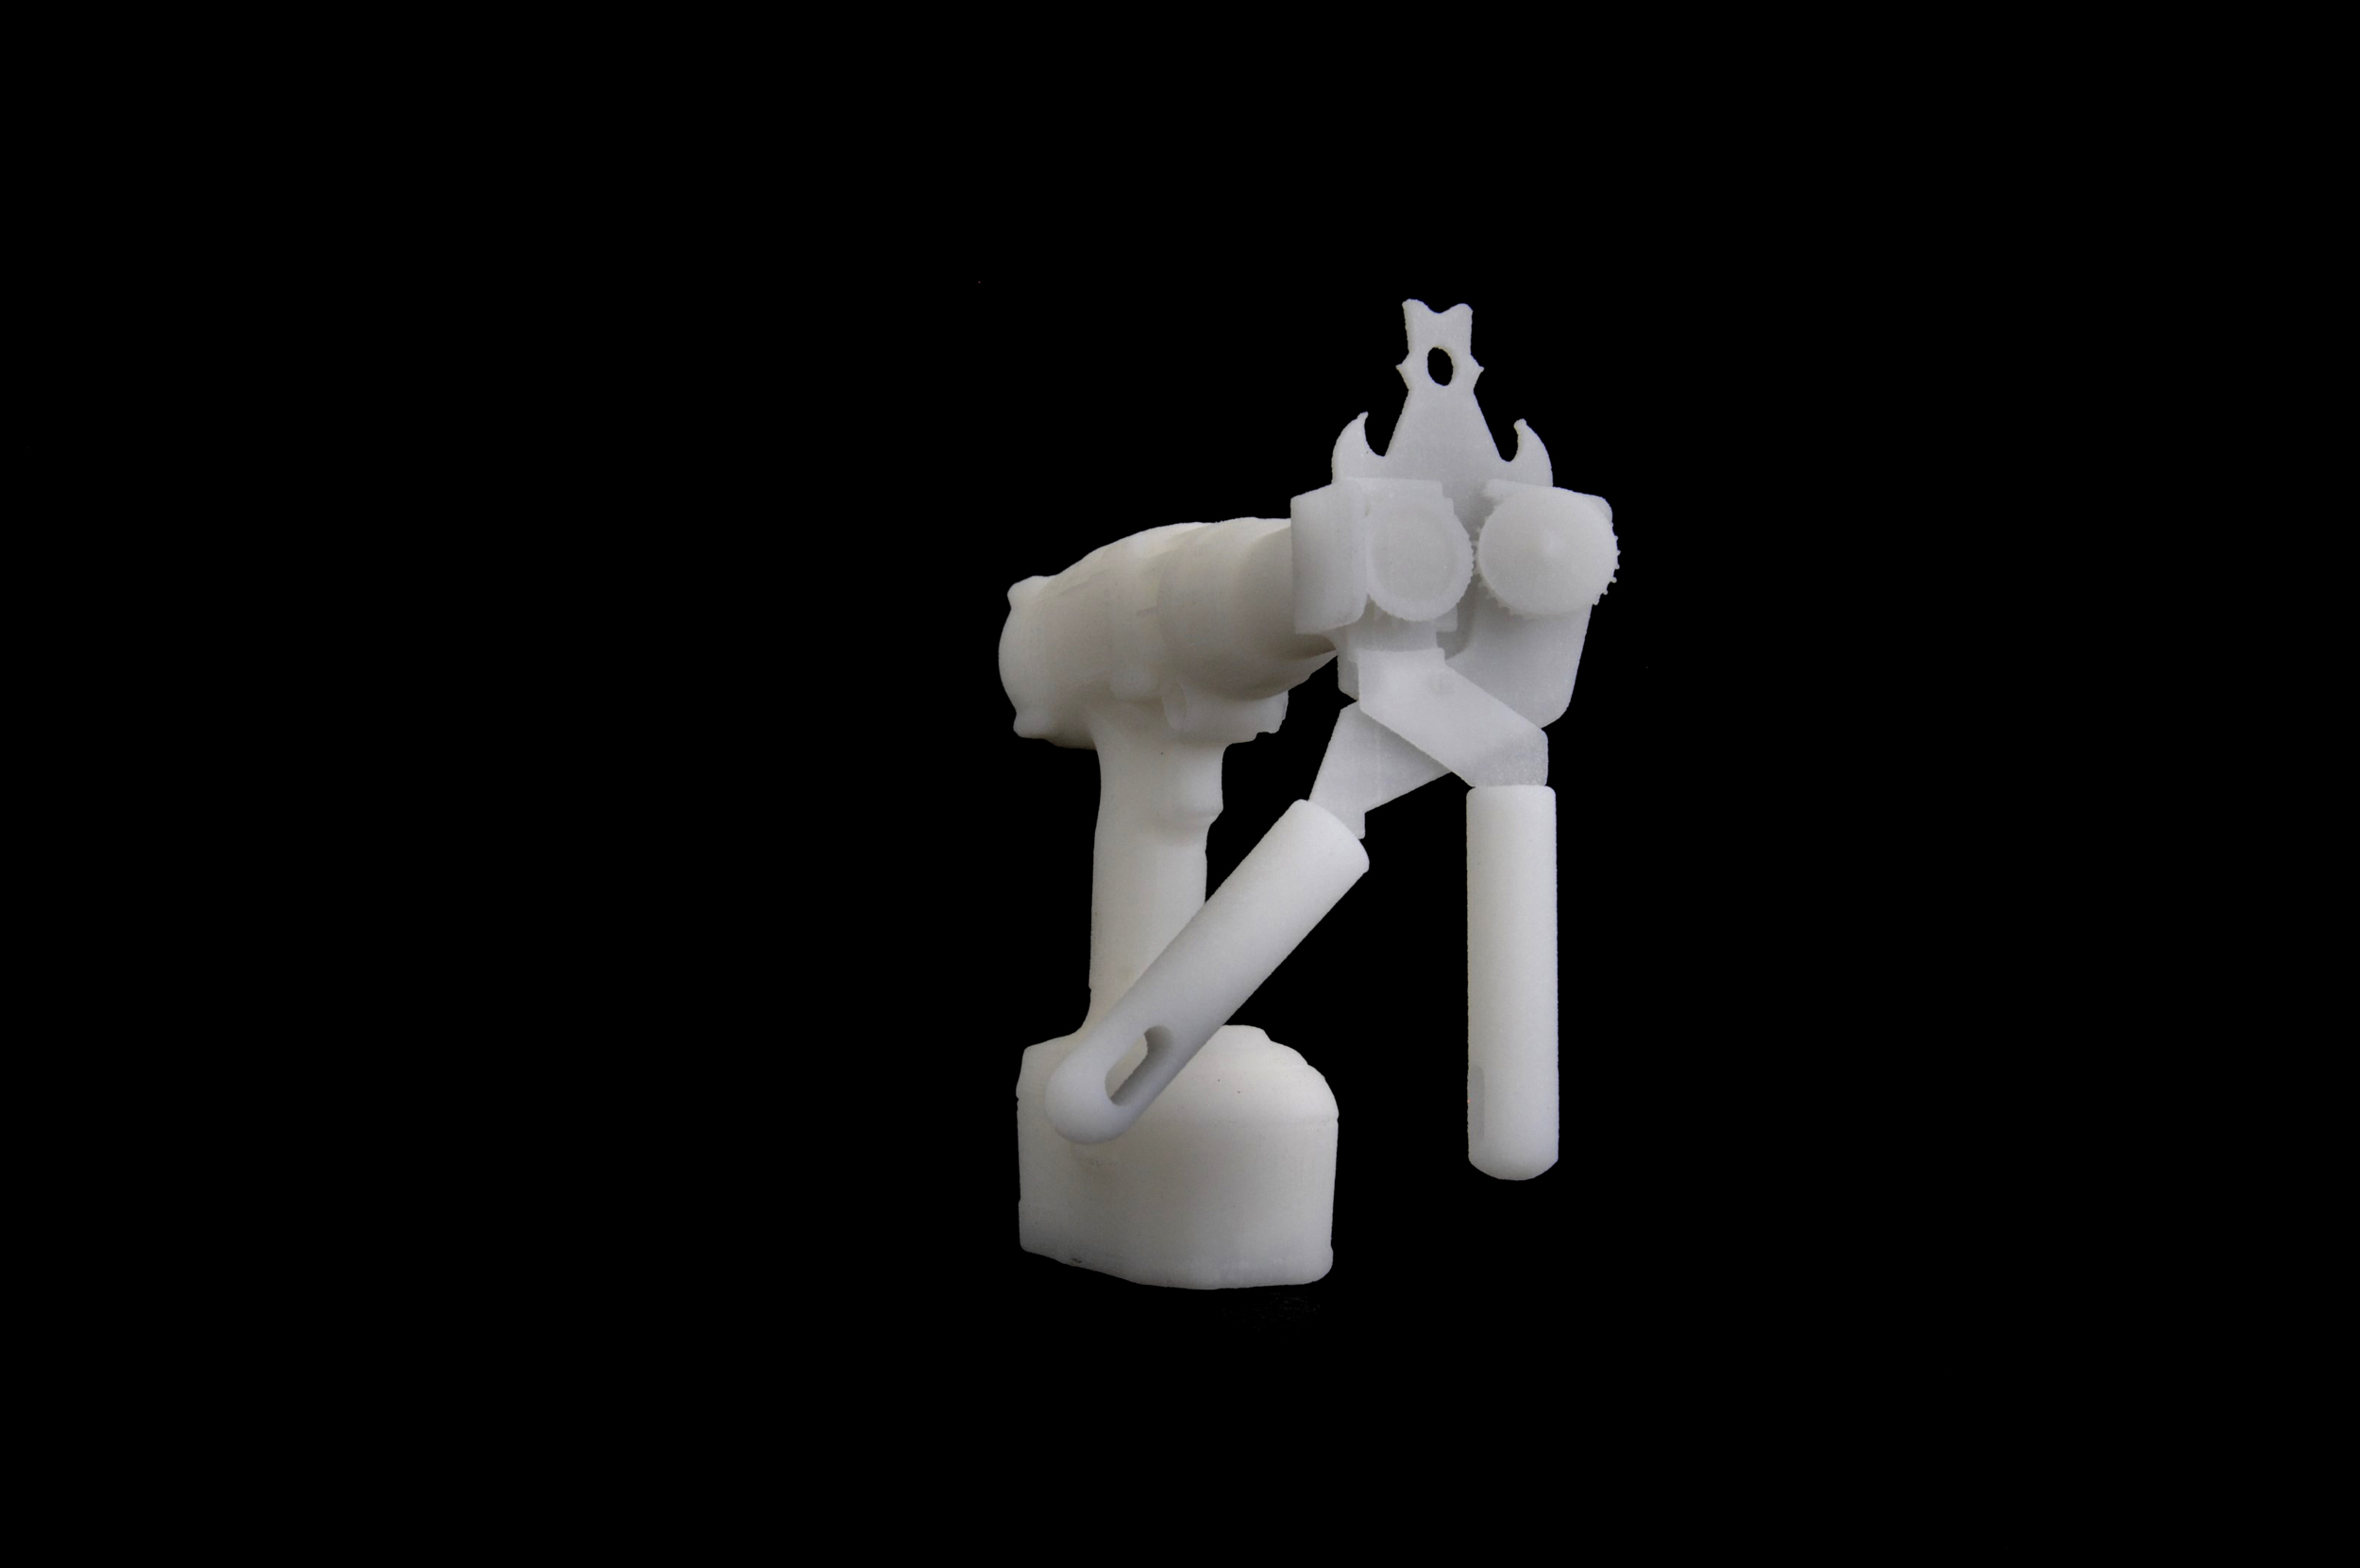  Formal metonymy, 2017, A projection of an animated 3D printed object - a can opener connected to a battery drill, 12 x 6 x 11 cm, Courtesy of the artist and Gypsum Gallery. 